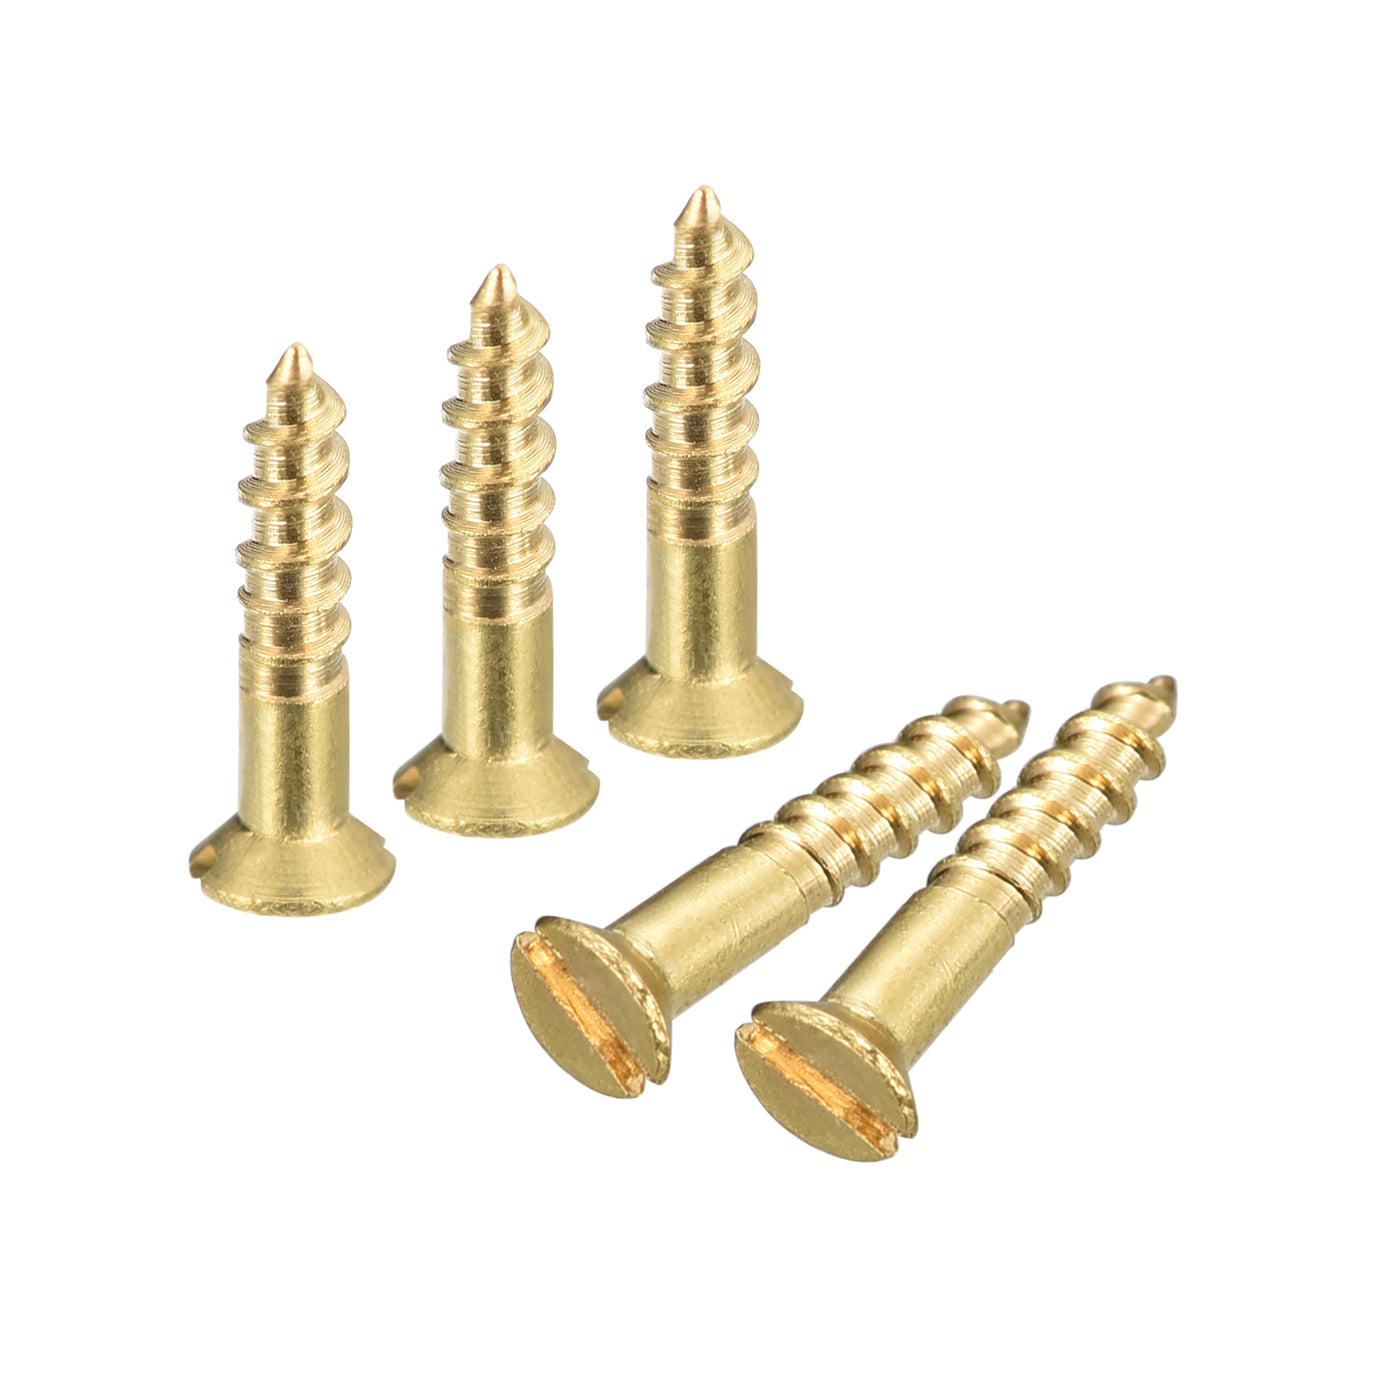 uxcell Uxcell 25Pcs M2 x 10mm Brass Slotted Drive Flat Head Wood Screws Self Tapping Screw